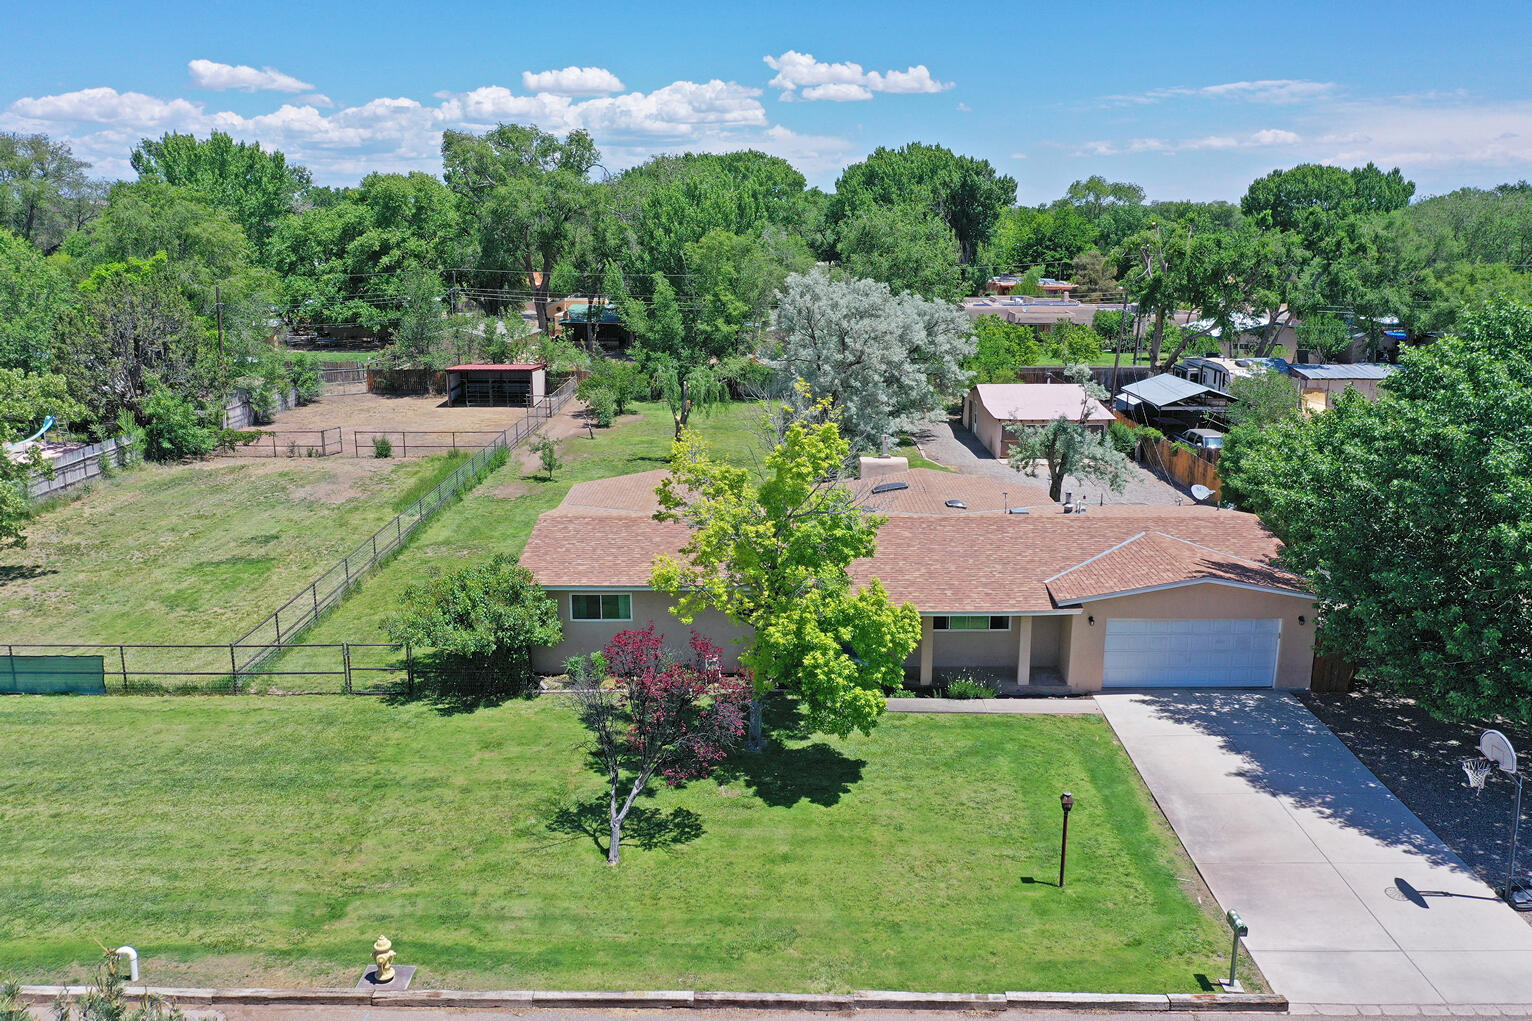 Beautiful North Valley home with over an acre of land, horse stables/barn/ and tack room.  Easy access for horse rides along the Bosque thanks to the irrigational canal rode just behind the house.  Enjoy mountain views, irrigation well to freely water all the manicured grass and trees , city water for the house. Upgrades include newer refrigerated air and furnace, synthetic stucco, hardwood floors and tile (no carpet), insulated mancave and garage, epoxied garage floors, large workshop, sunroom, newer kitchen appliances (2020), custom jetted tub and shower tile.  Backyard access from the side of the house and from horse trail behind the house. Enjoy country living in the city with easy access to Paseo, Alameda open space, and shopping.